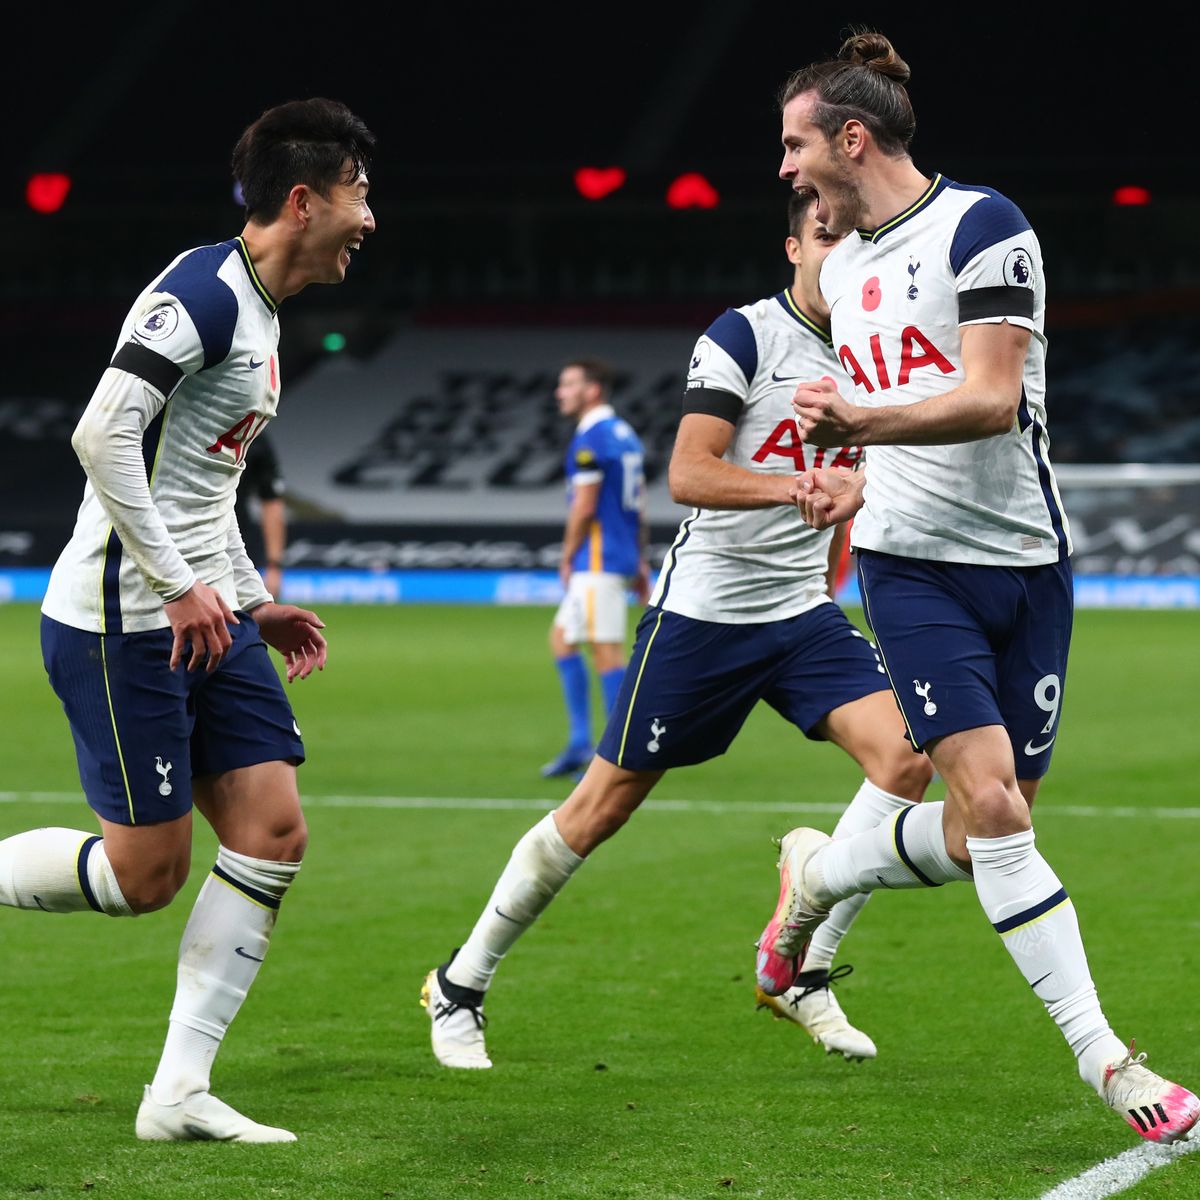 Tottenham Hotspur star Gareth Bale was pictured making fun of teammate Son Heung-Min with a reference to Liverpool keeper Loris Karius.